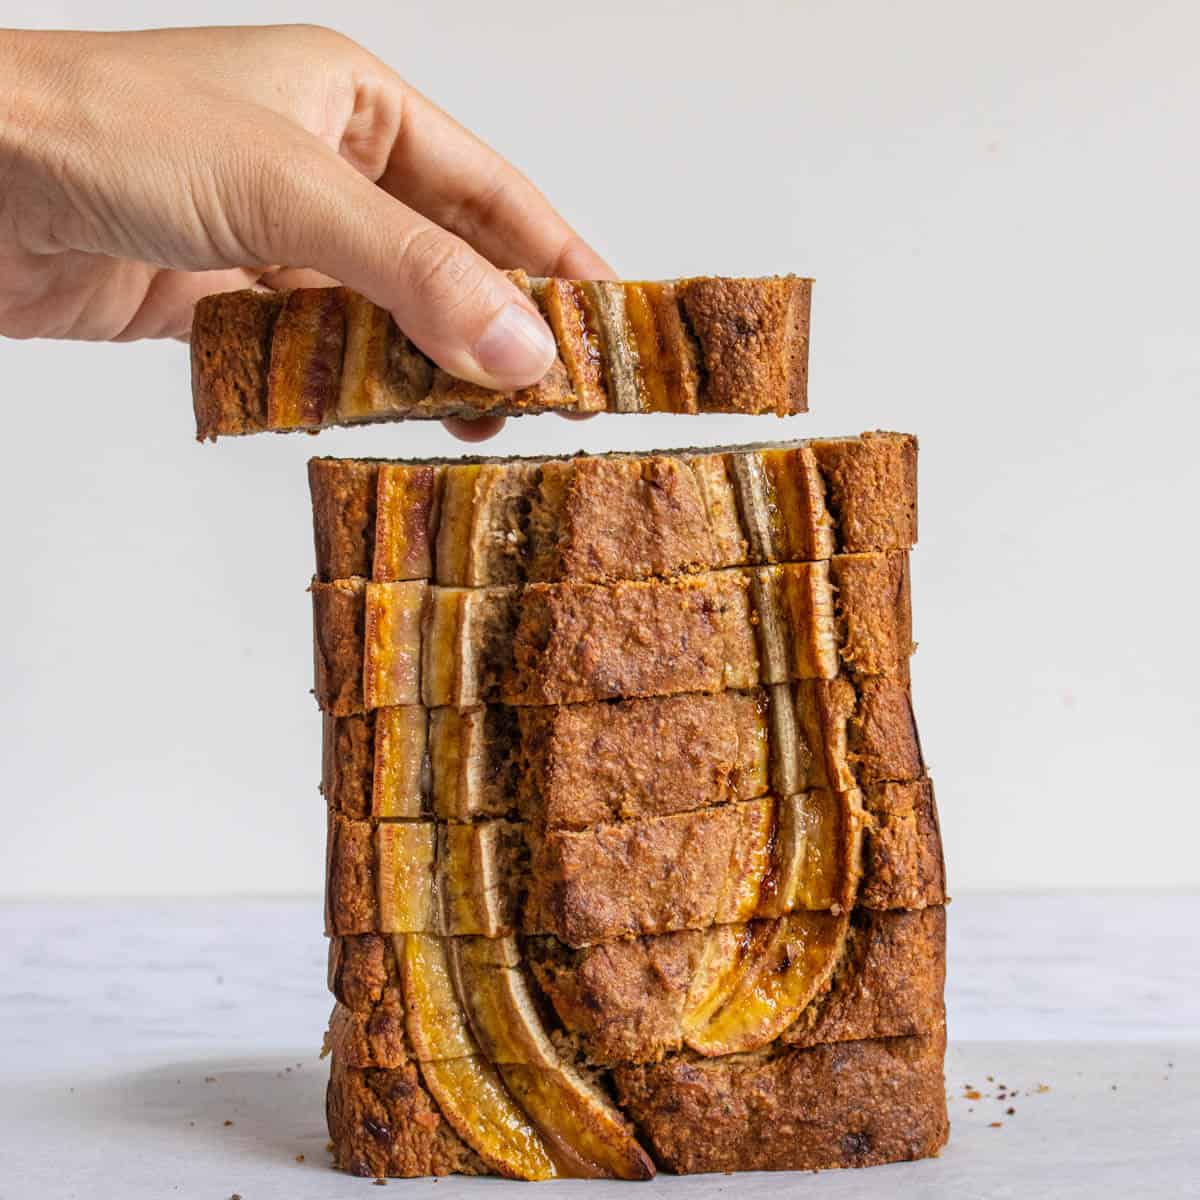 One piece of Healthy Banana Bread being picked up from a stack